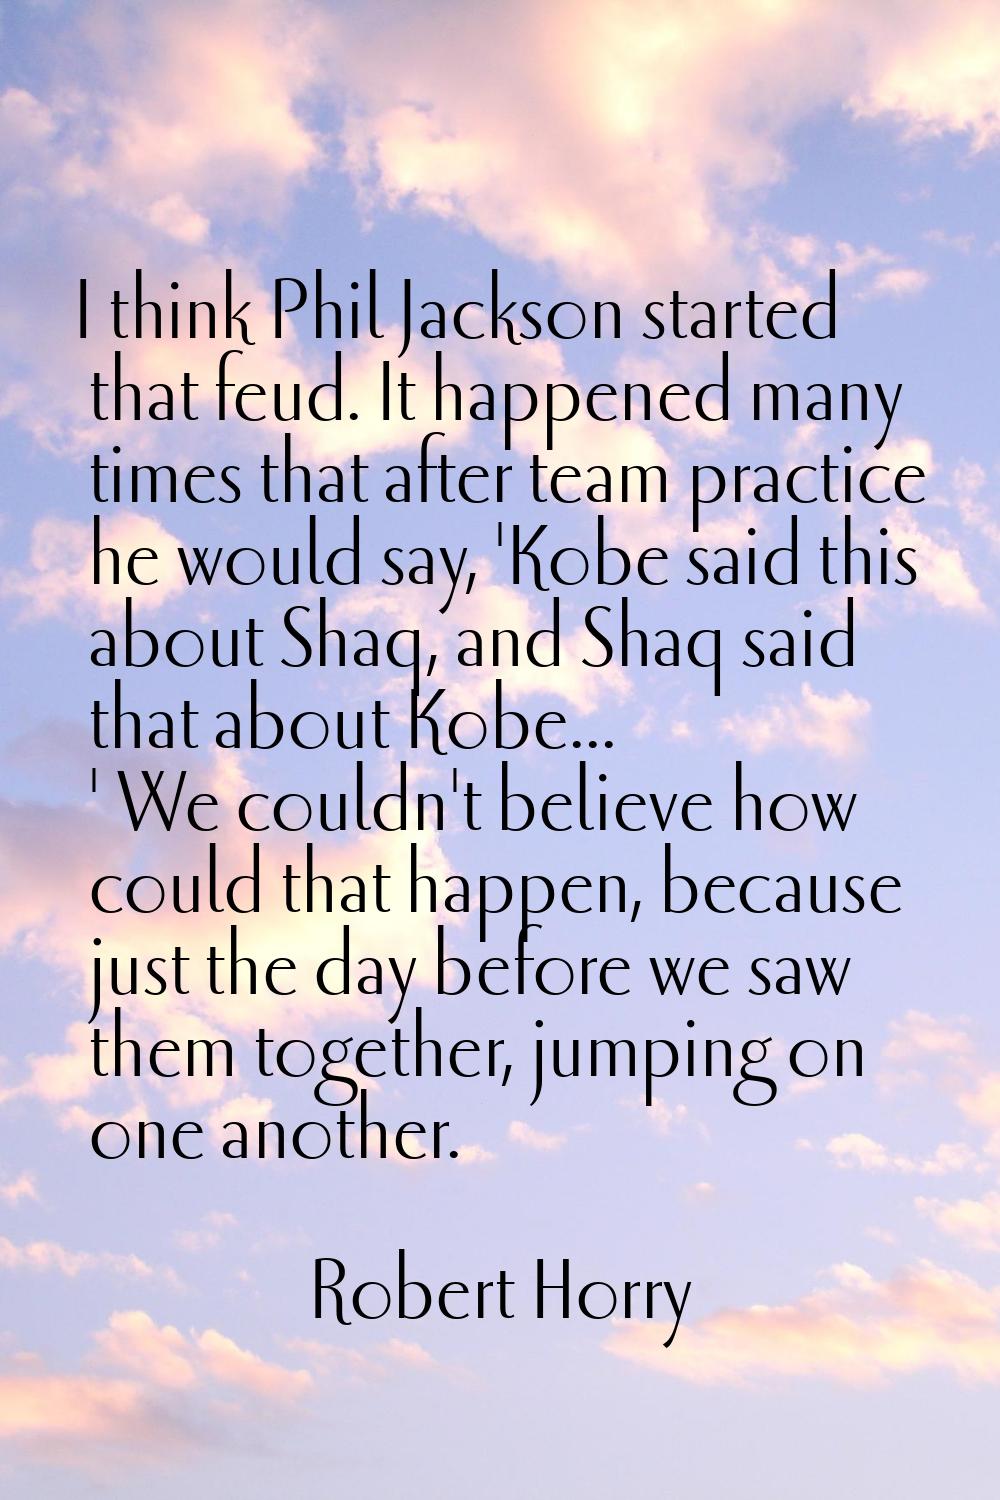 I think Phil Jackson started that feud. It happened many times that after team practice he would sa